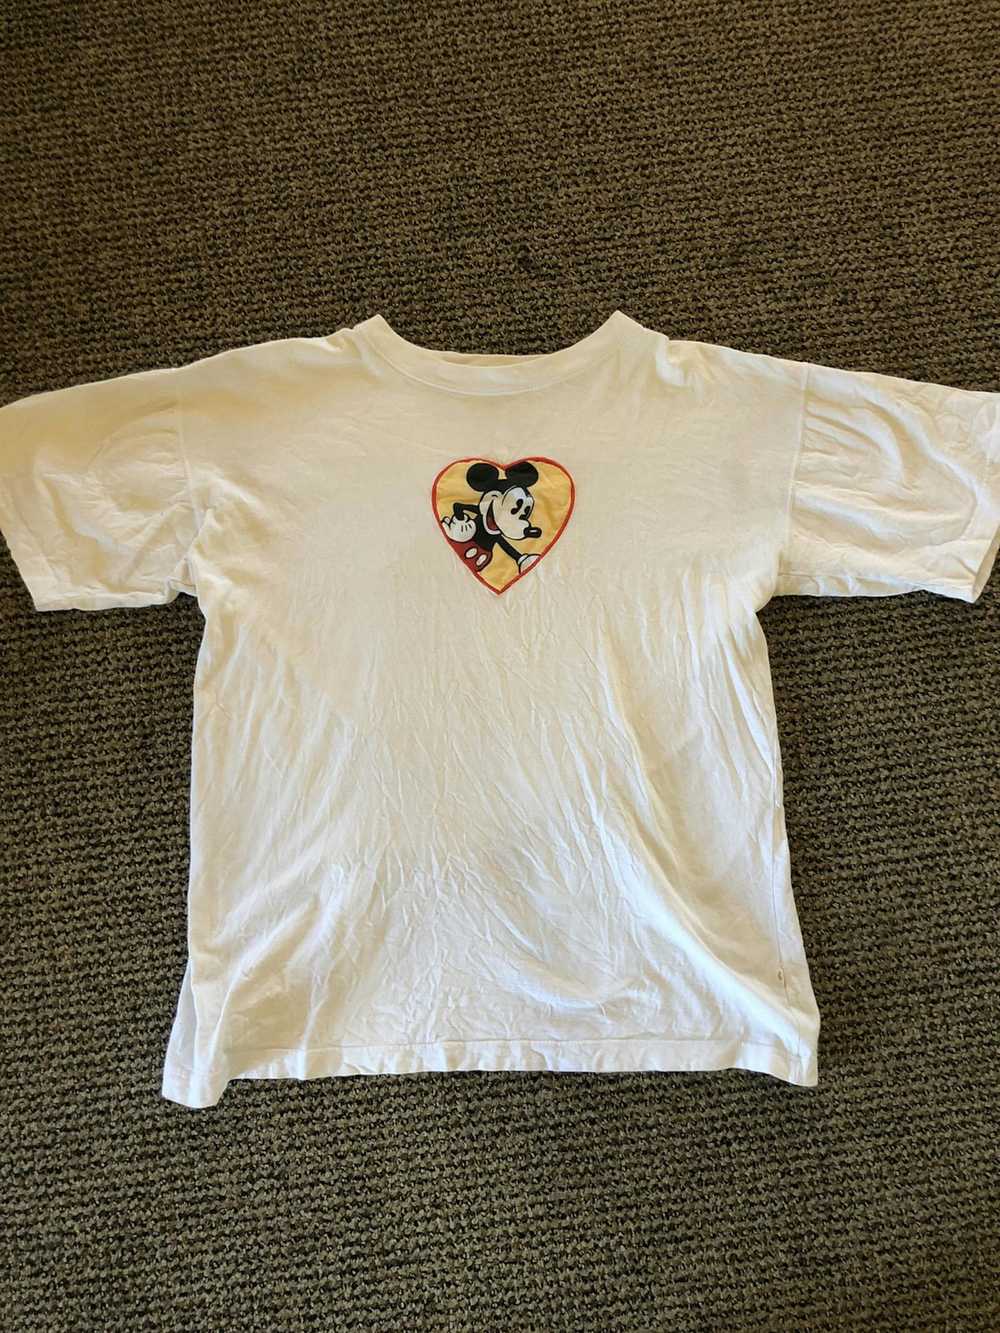 Mickey Mouse Vintage Mickey Mouse Tee - image 1